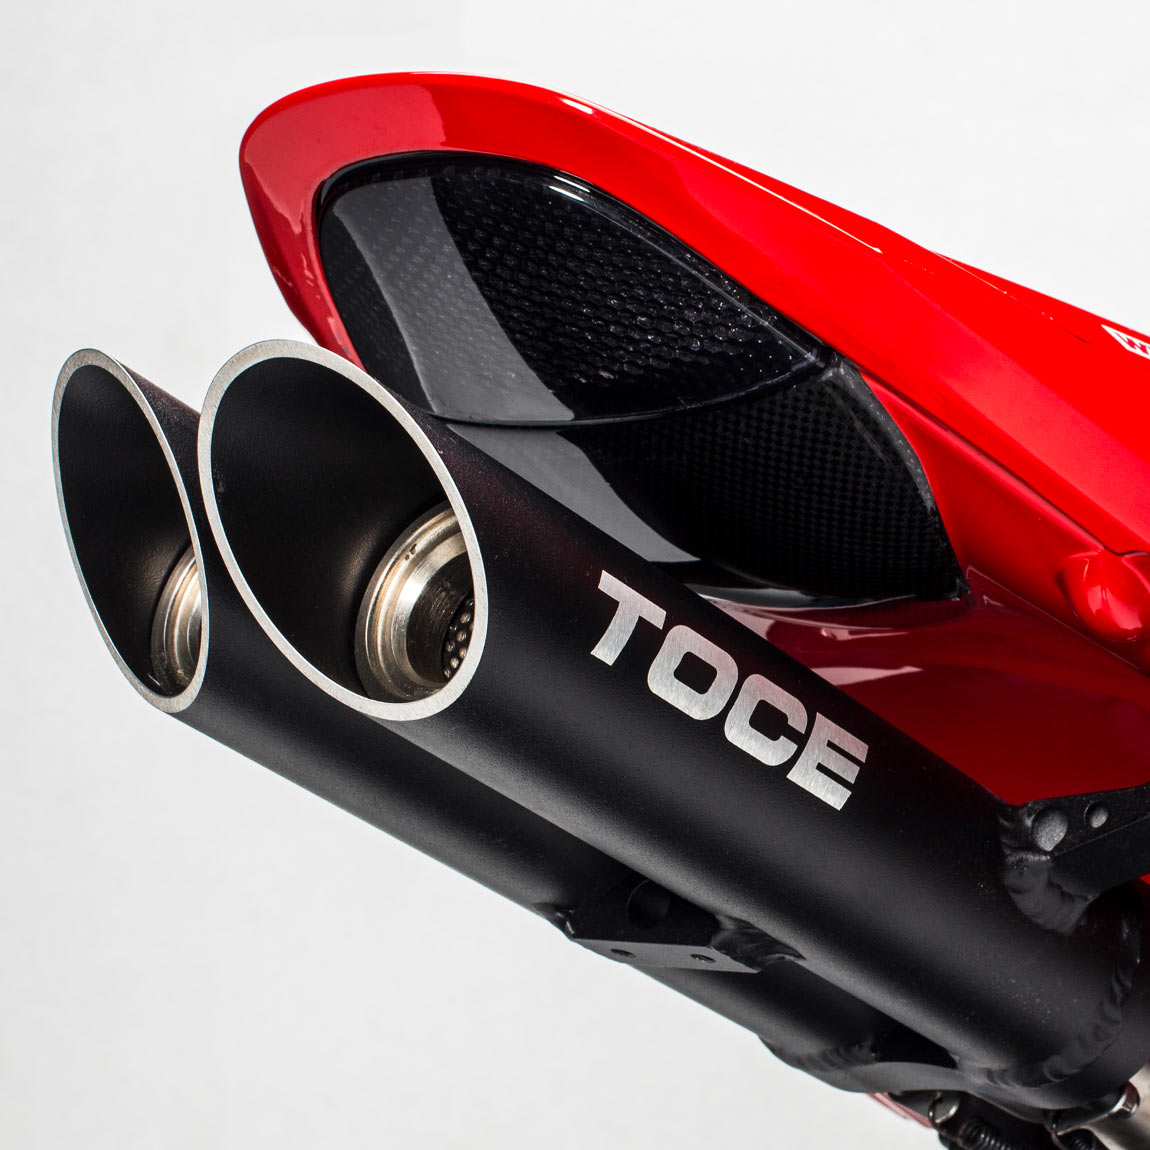 2007-2012 Honda CBR600RR displaying the TST integrated tail light that helped make TST popular.